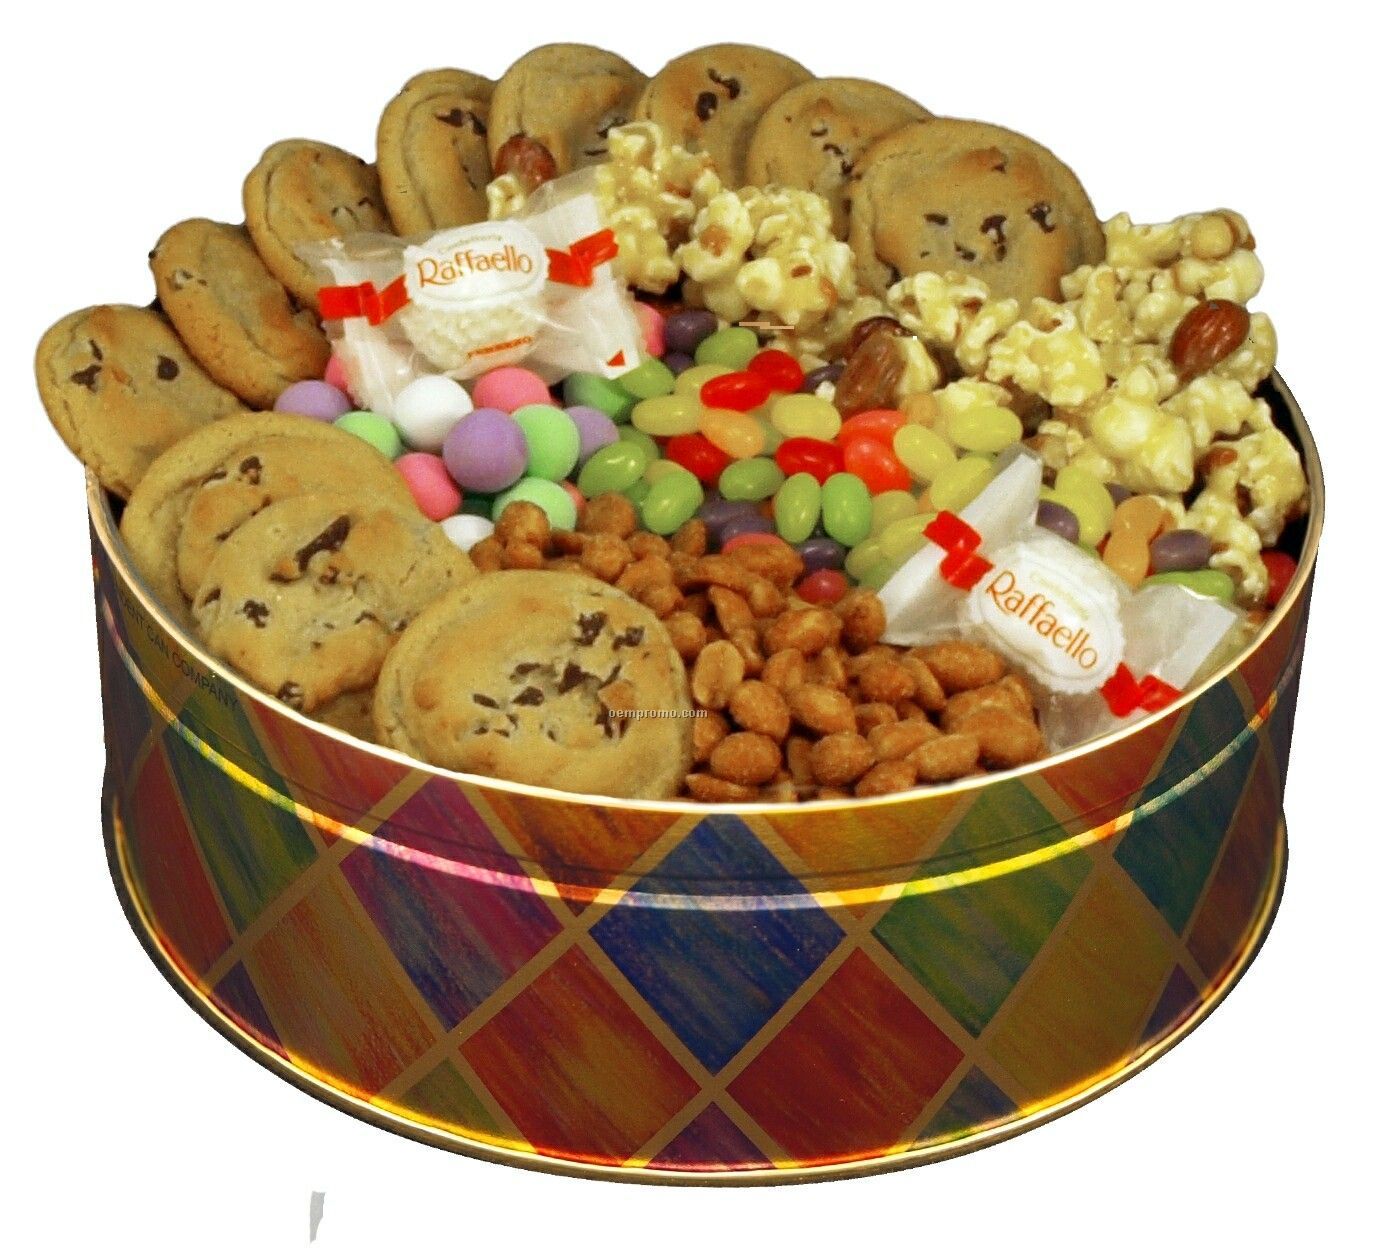 Snack Attack Assortment (58 Oz. In Large Canister)